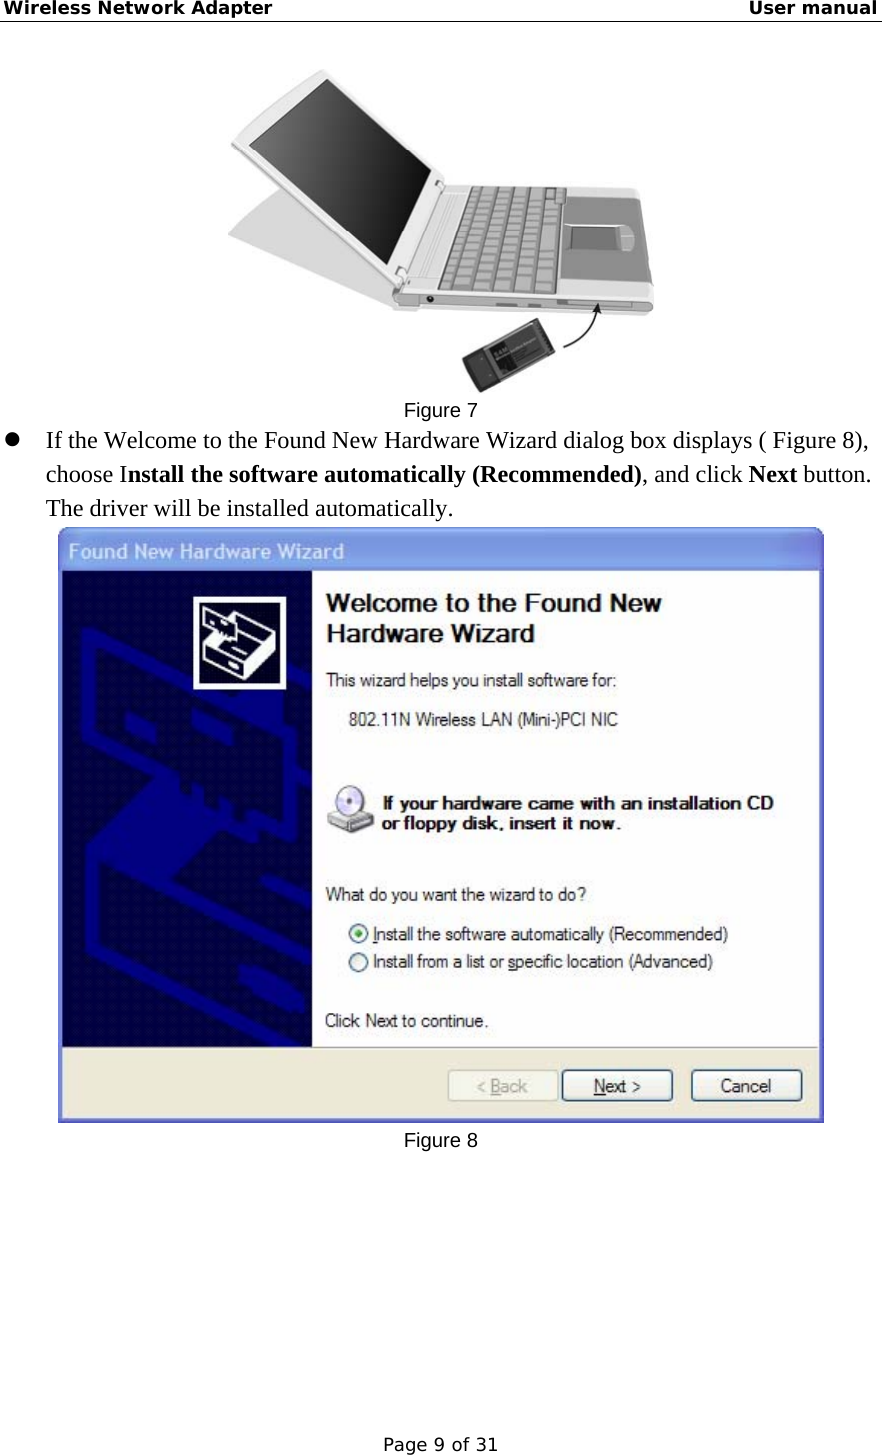 Wireless Network Adapter                                                    User manual Page 9 of 31  Figure 7 z If the Welcome to the Found New Hardware Wizard dialog box displays ( Figure 8), choose Install the software automatically (Recommended), and click Next button. The driver will be installed automatically.  Figure 8 